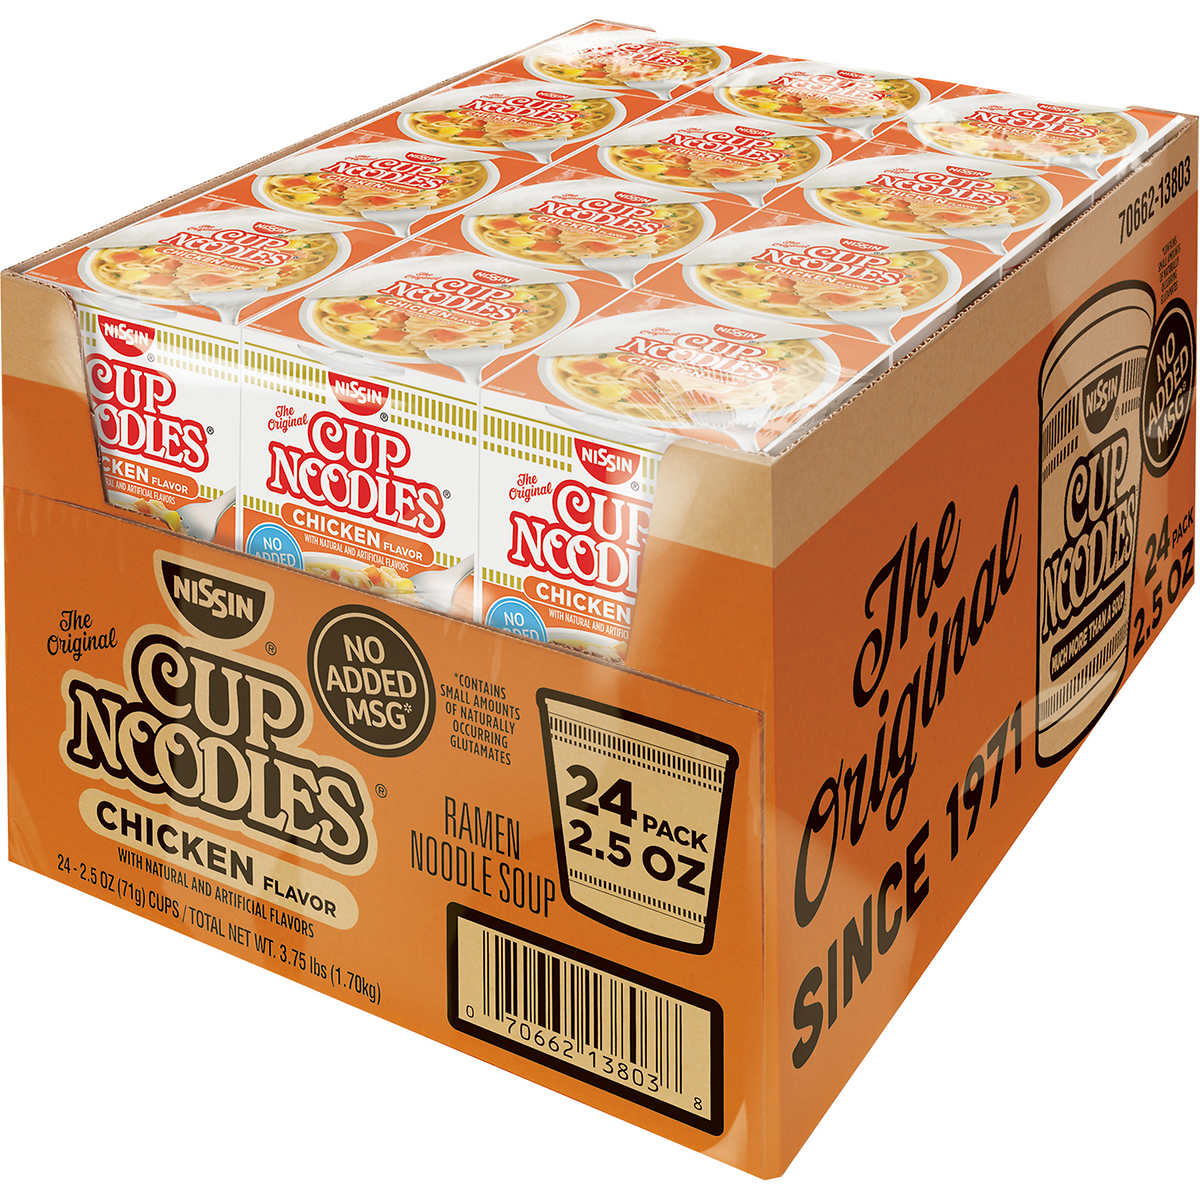 Nissin Cup Noodles Flavored Soup, Chicken, 2.5 oz, 24 ct